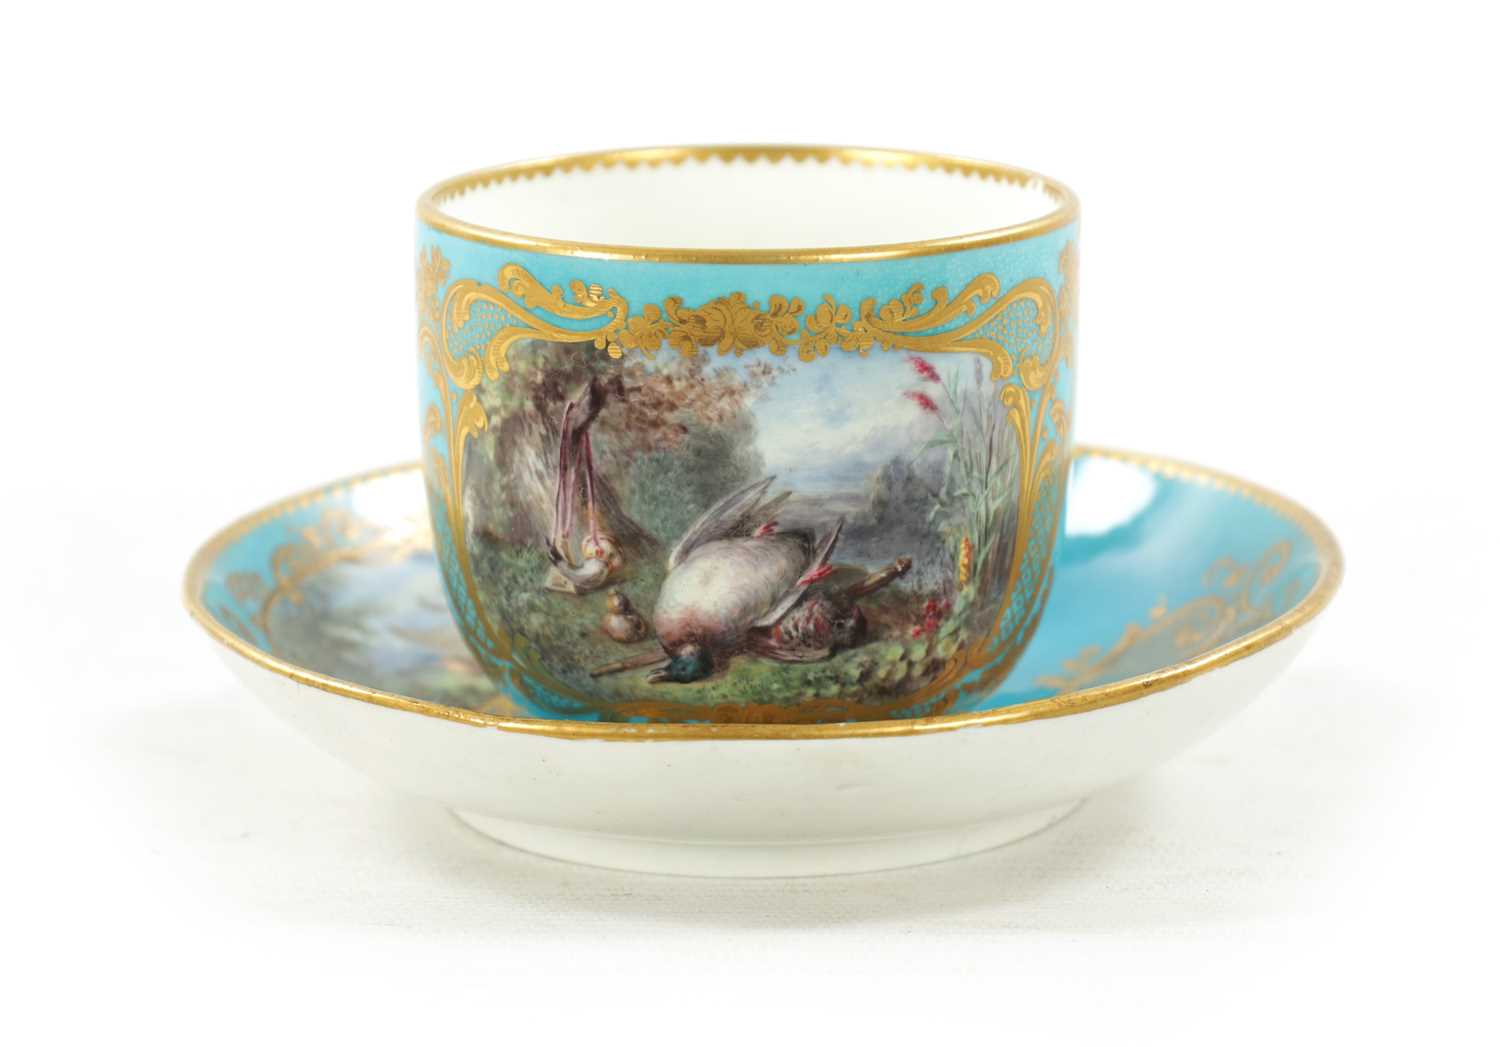 A FINE LATE 18TH / 19TH CENTURY SEVRES PORCELAIN CUP AND SAUCER